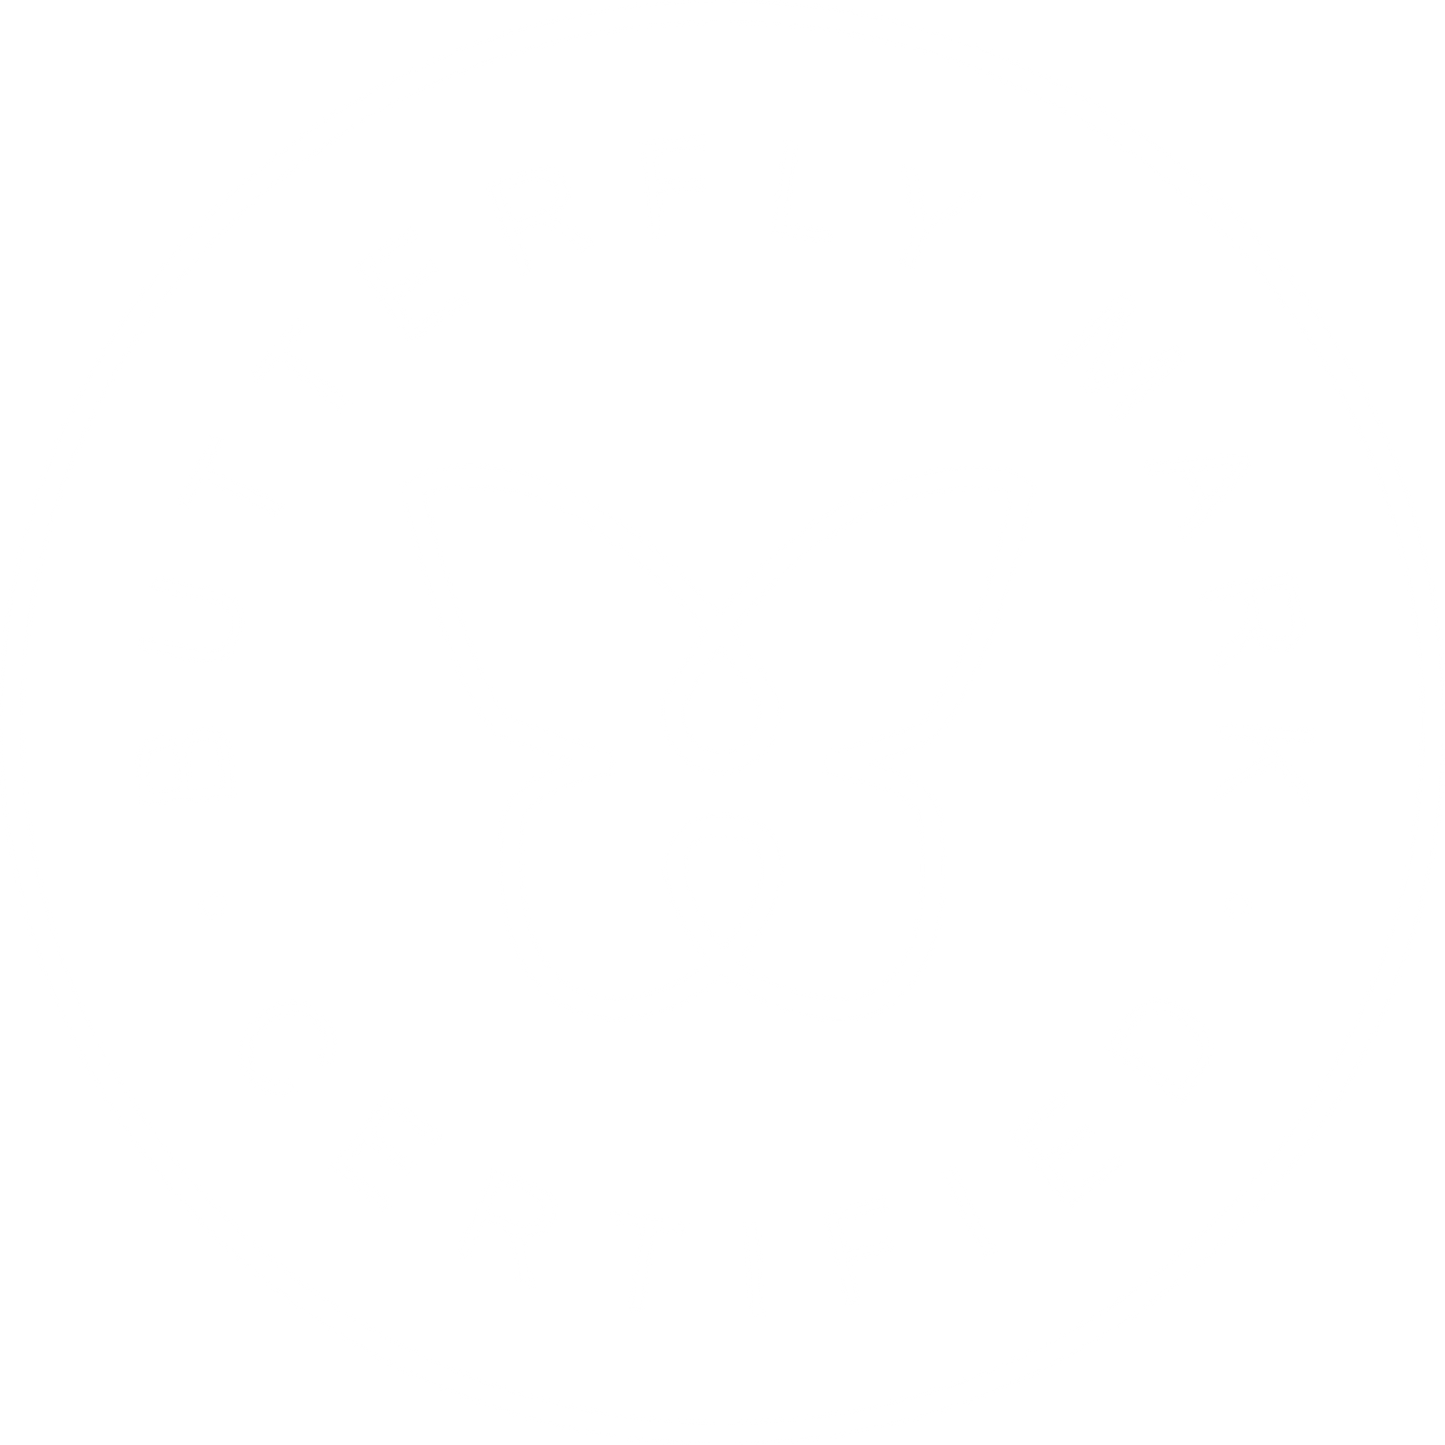 butterfly mark certification for inlight beauty products